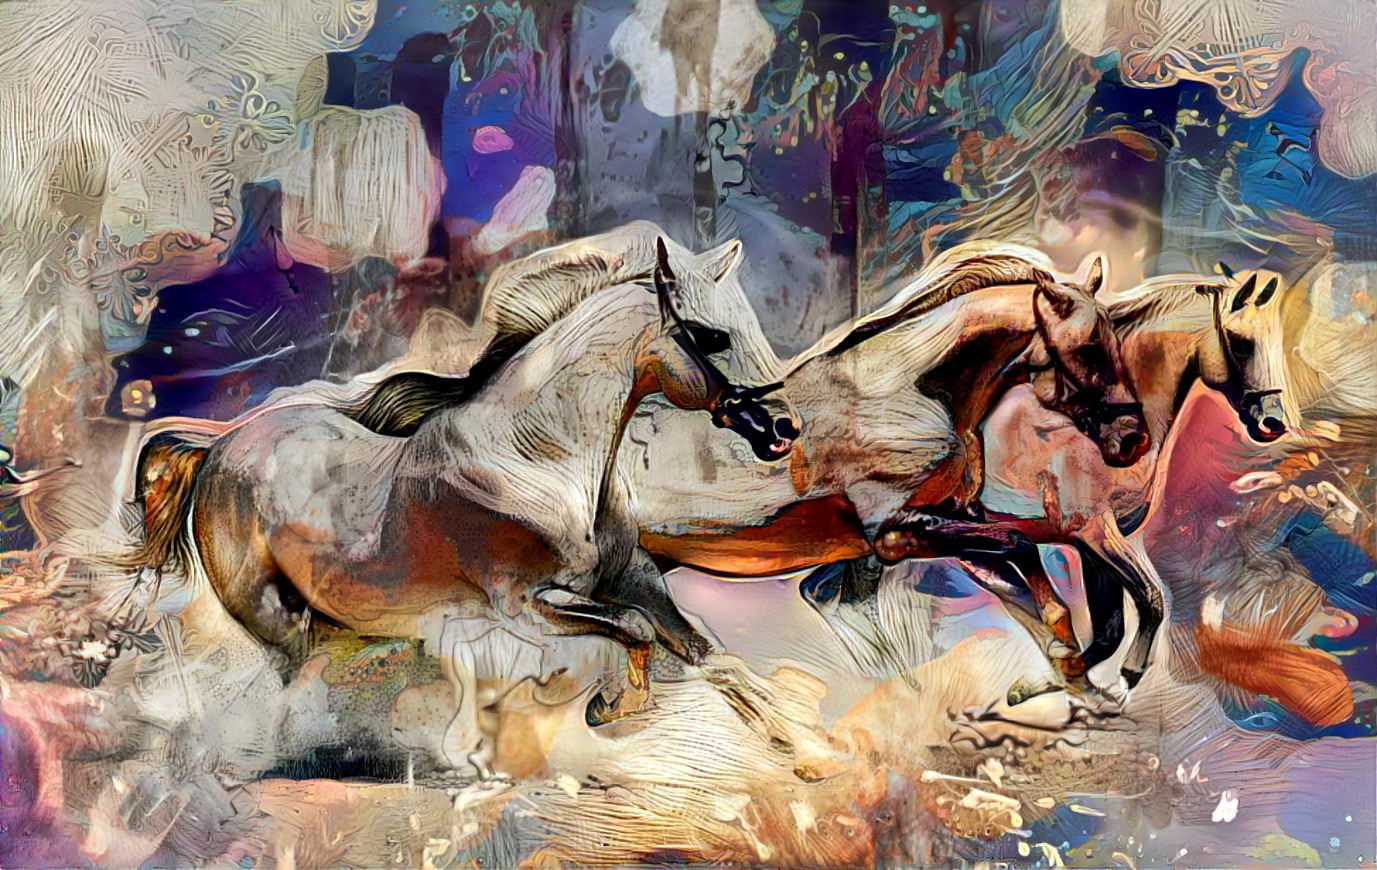 Stampede (Image by ArtTower from Pixabay)